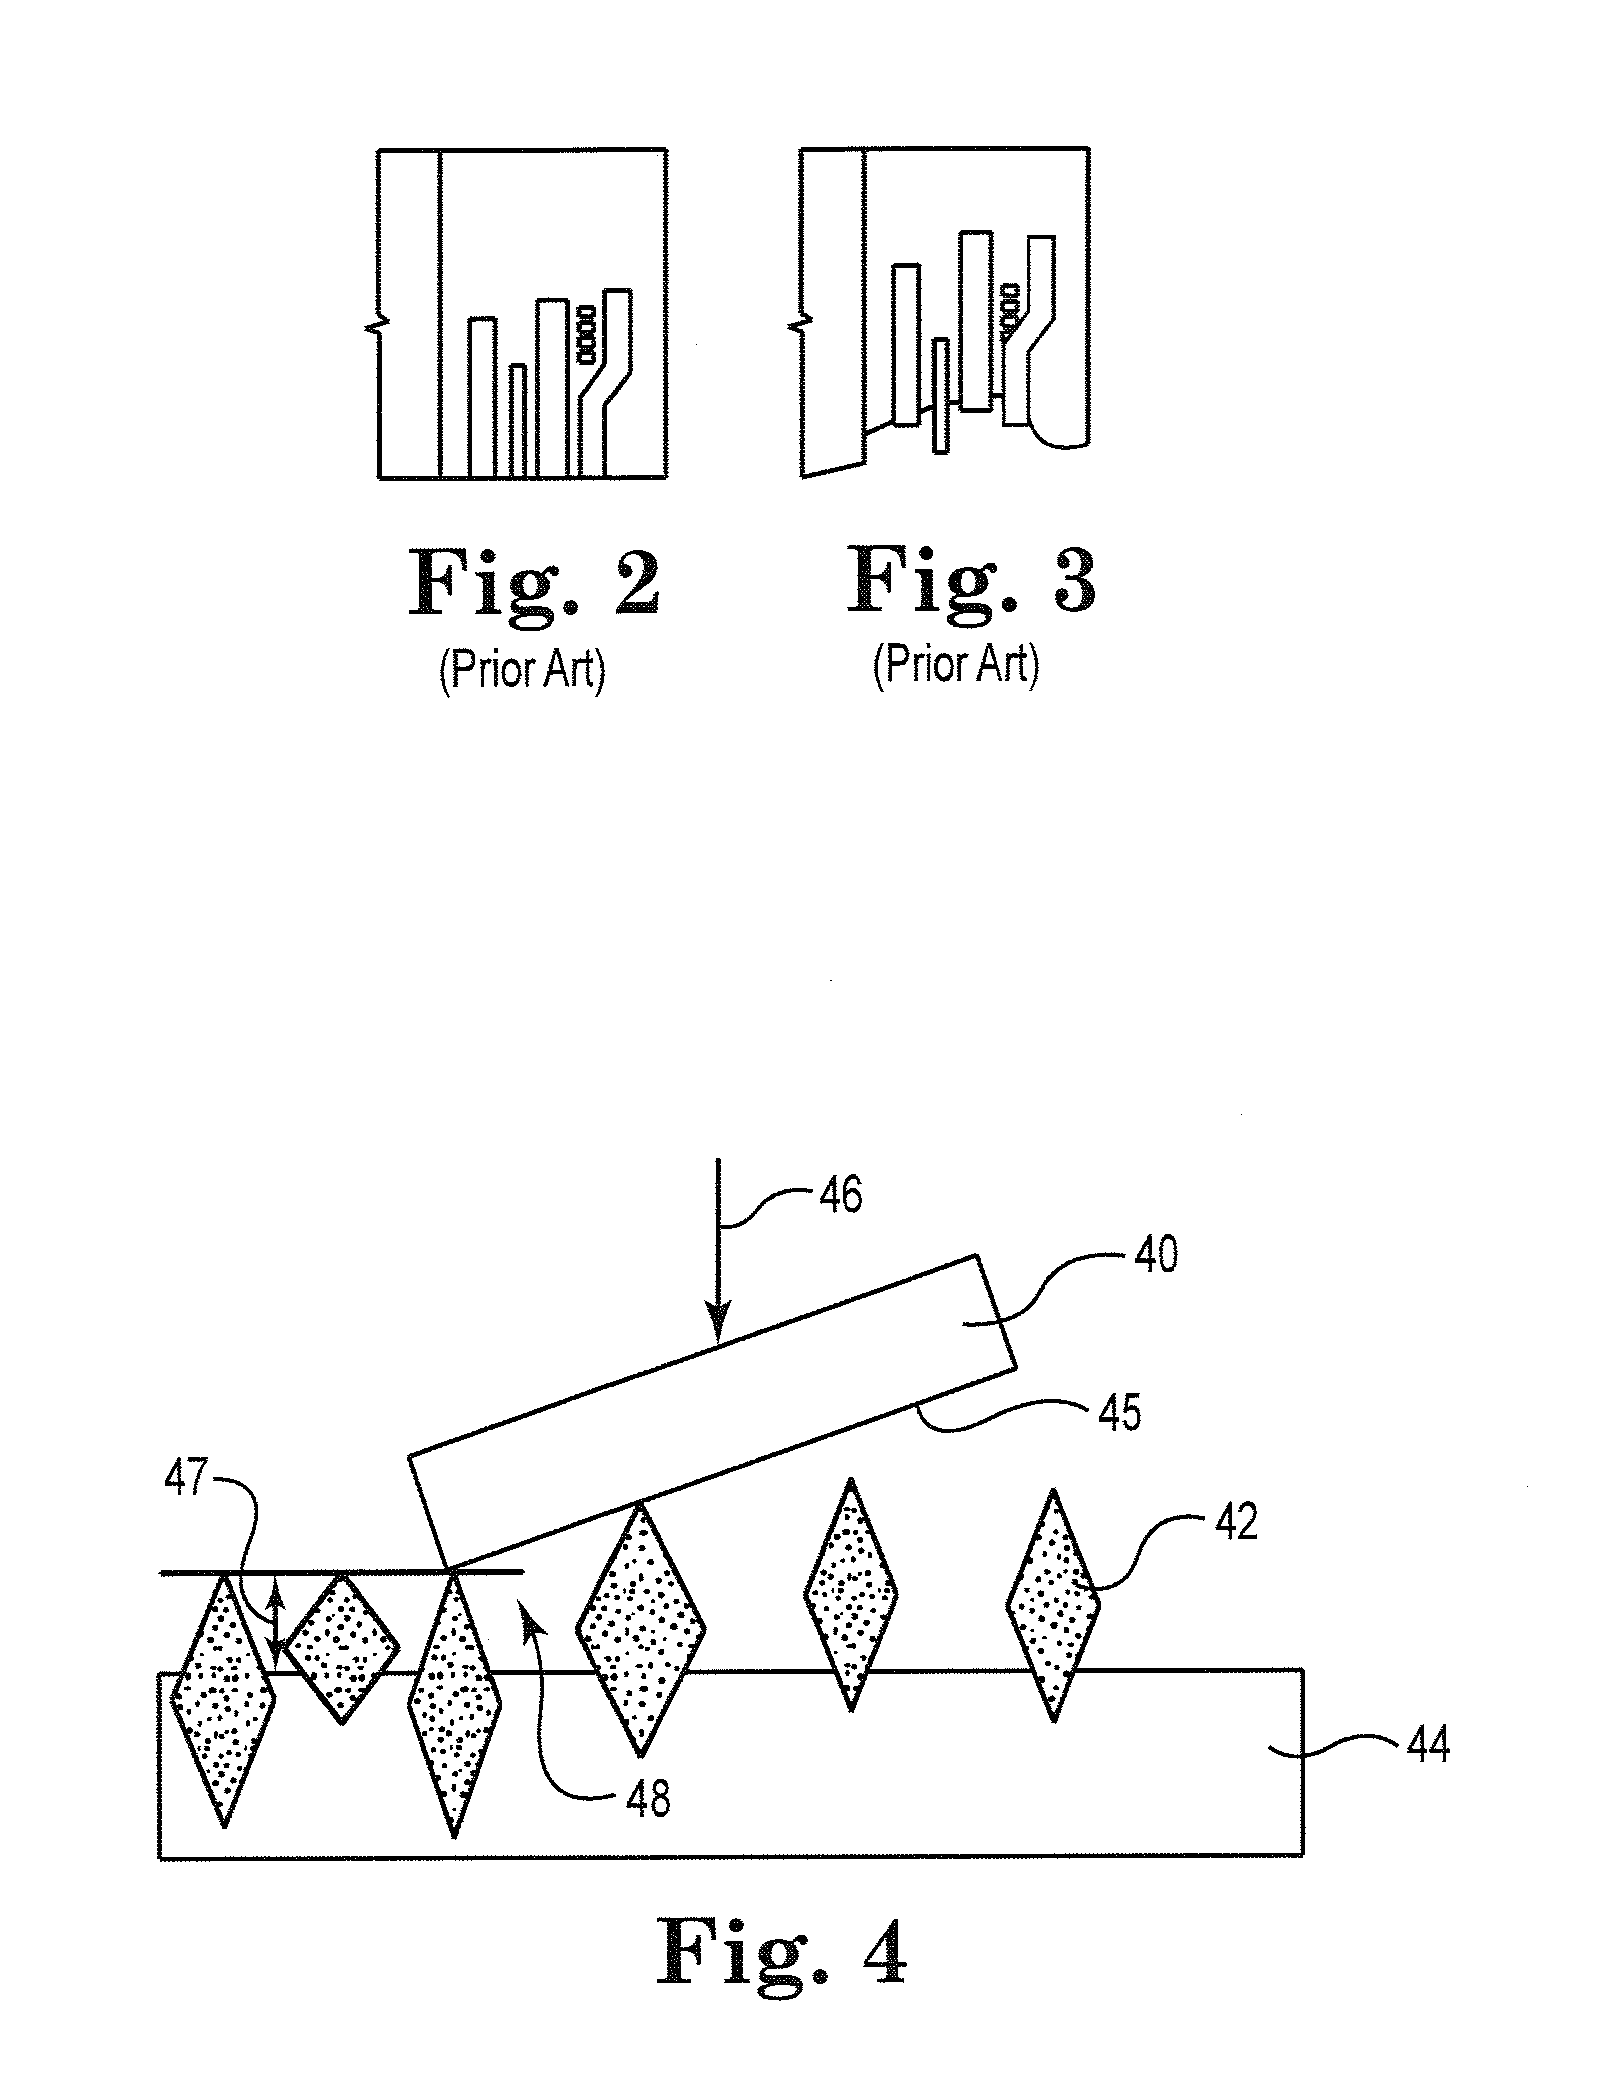 Dressing bar for embedding abrasive particles into substrates